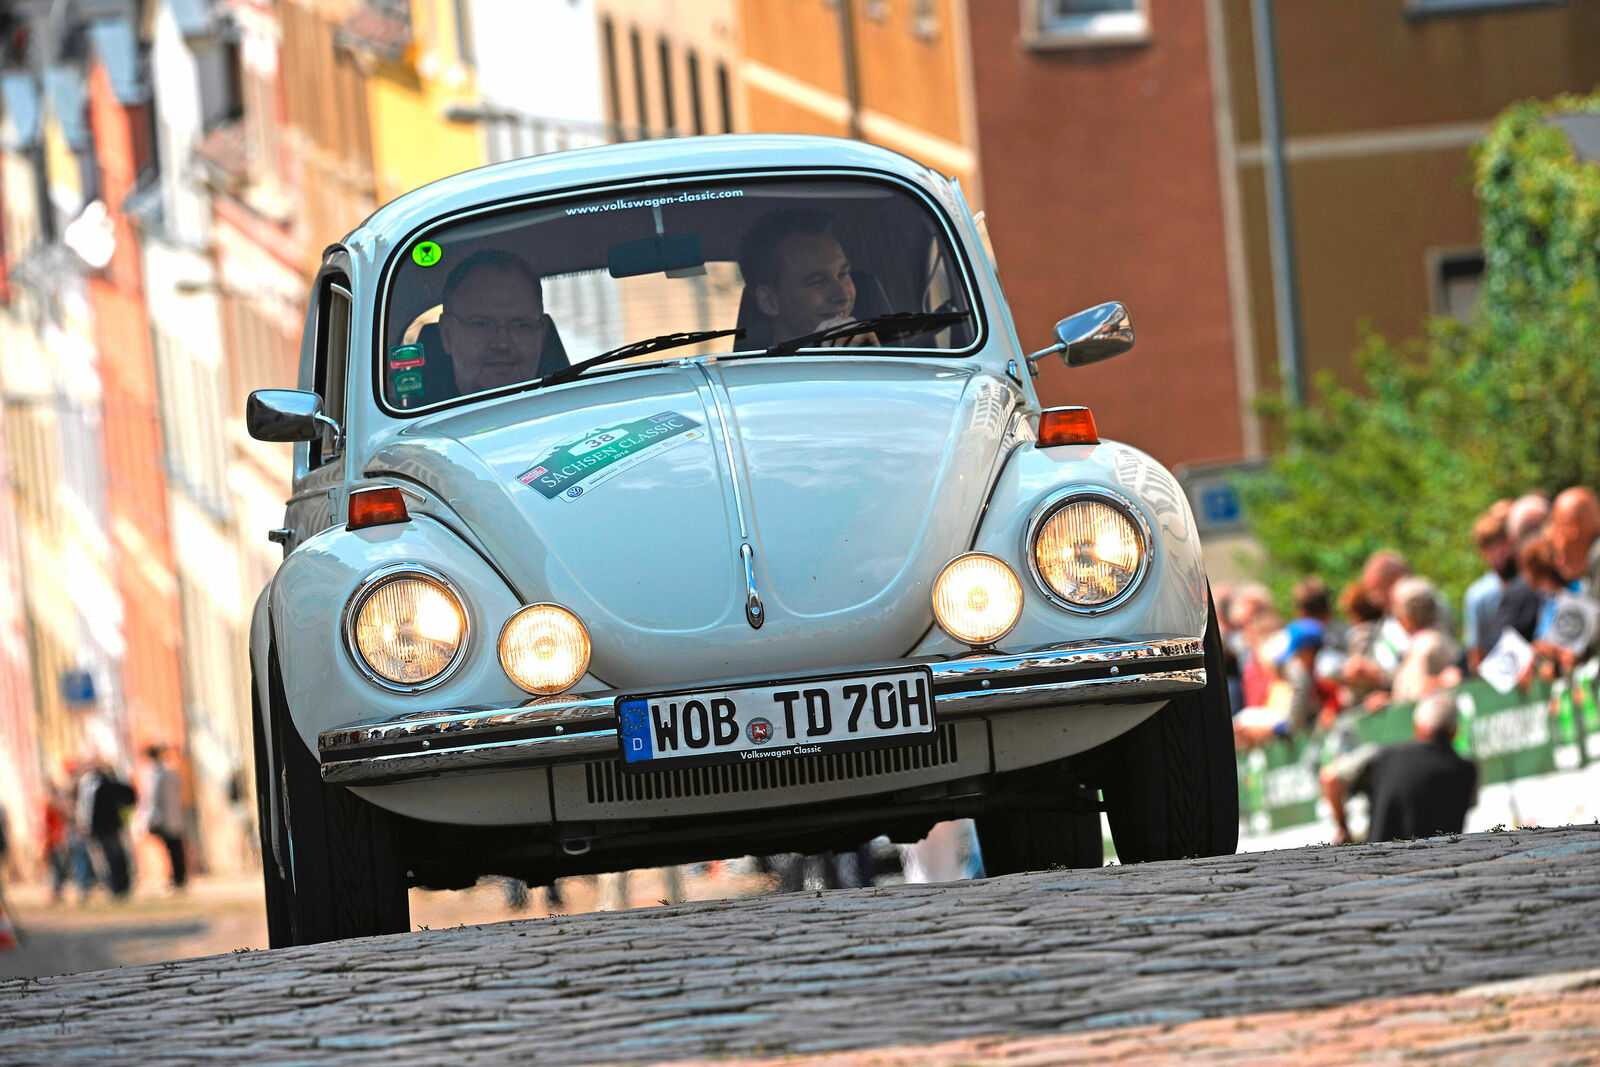 Lining up for the Volkswagen Saxony team in the 2018 Sachsen Classic: 1302 ‘Theo Decker’ Beetle (1972).